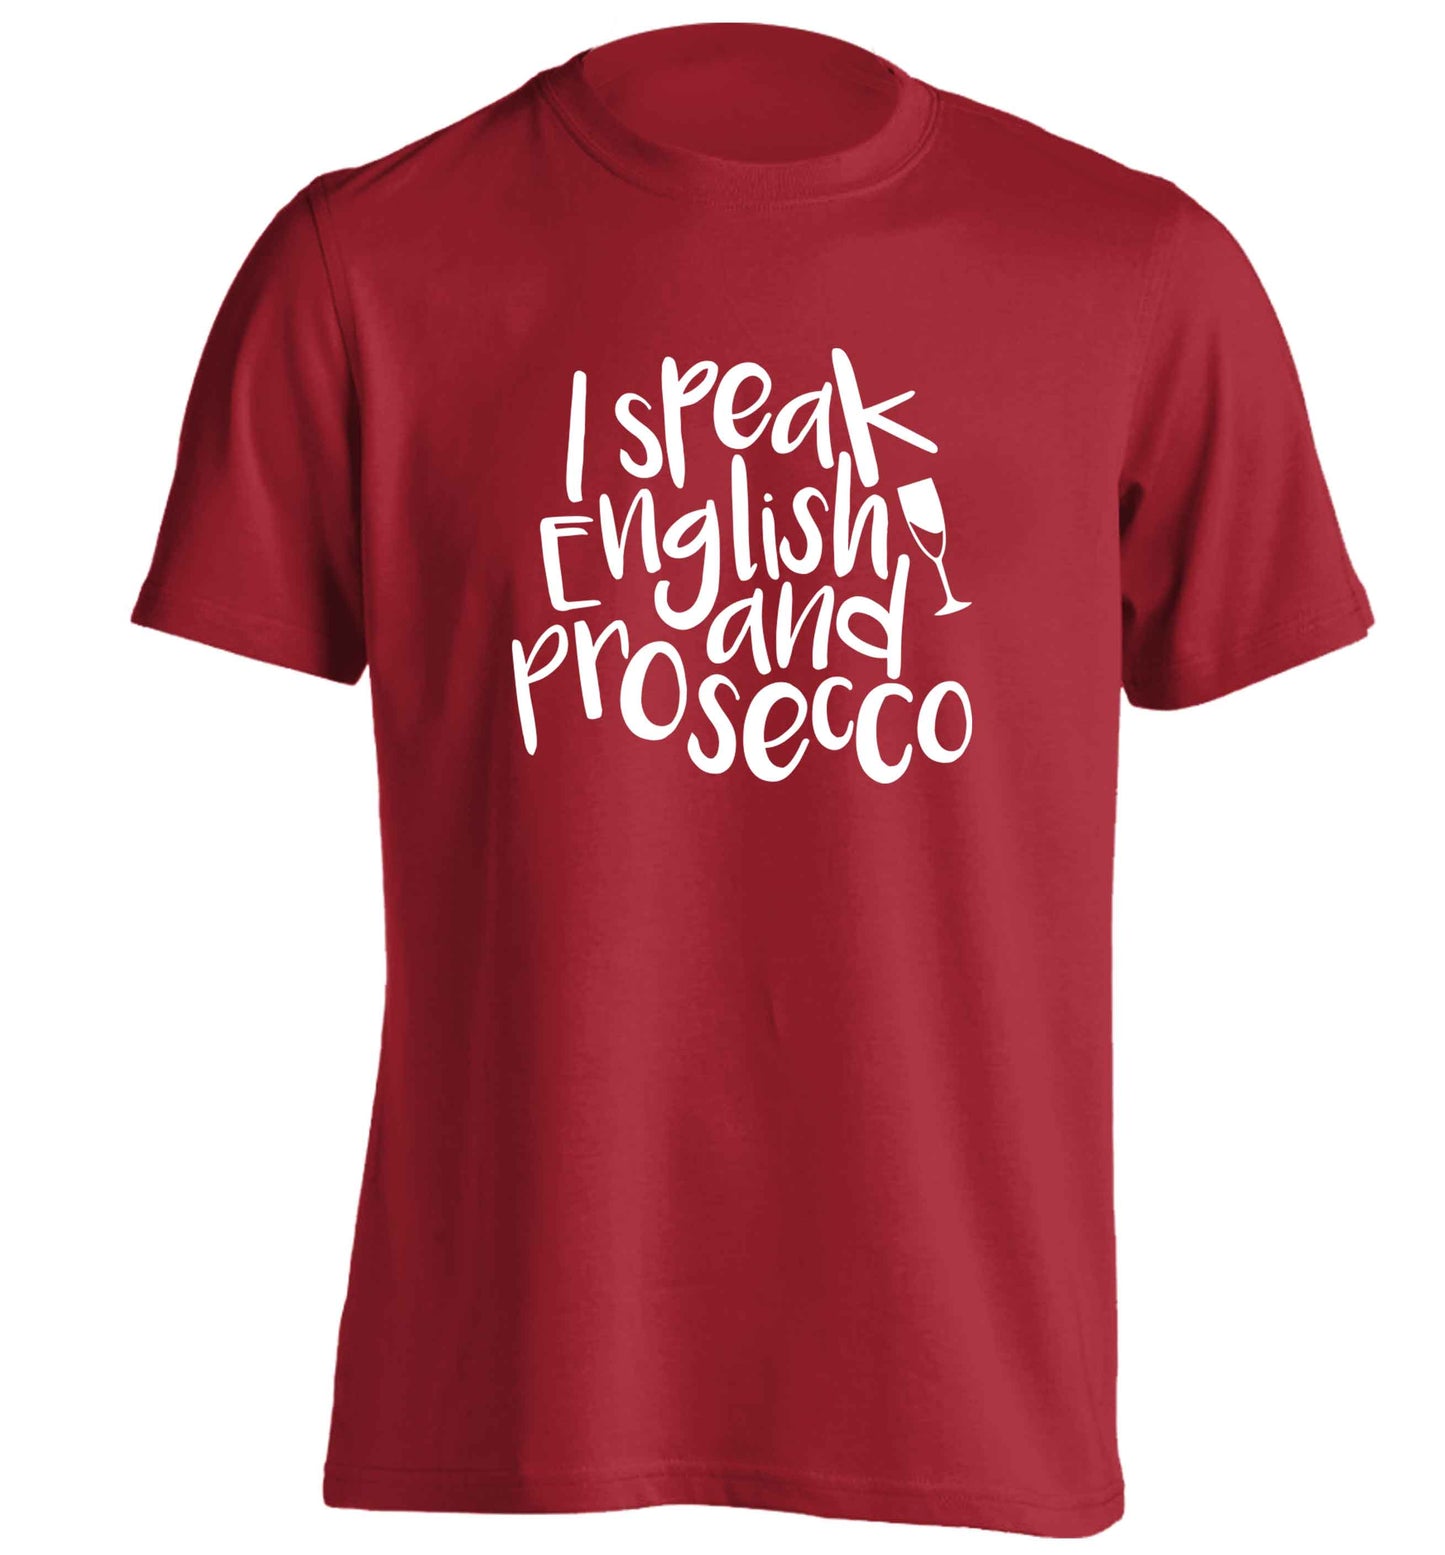 I speak English and prosecco adults unisex red Tshirt 2XL